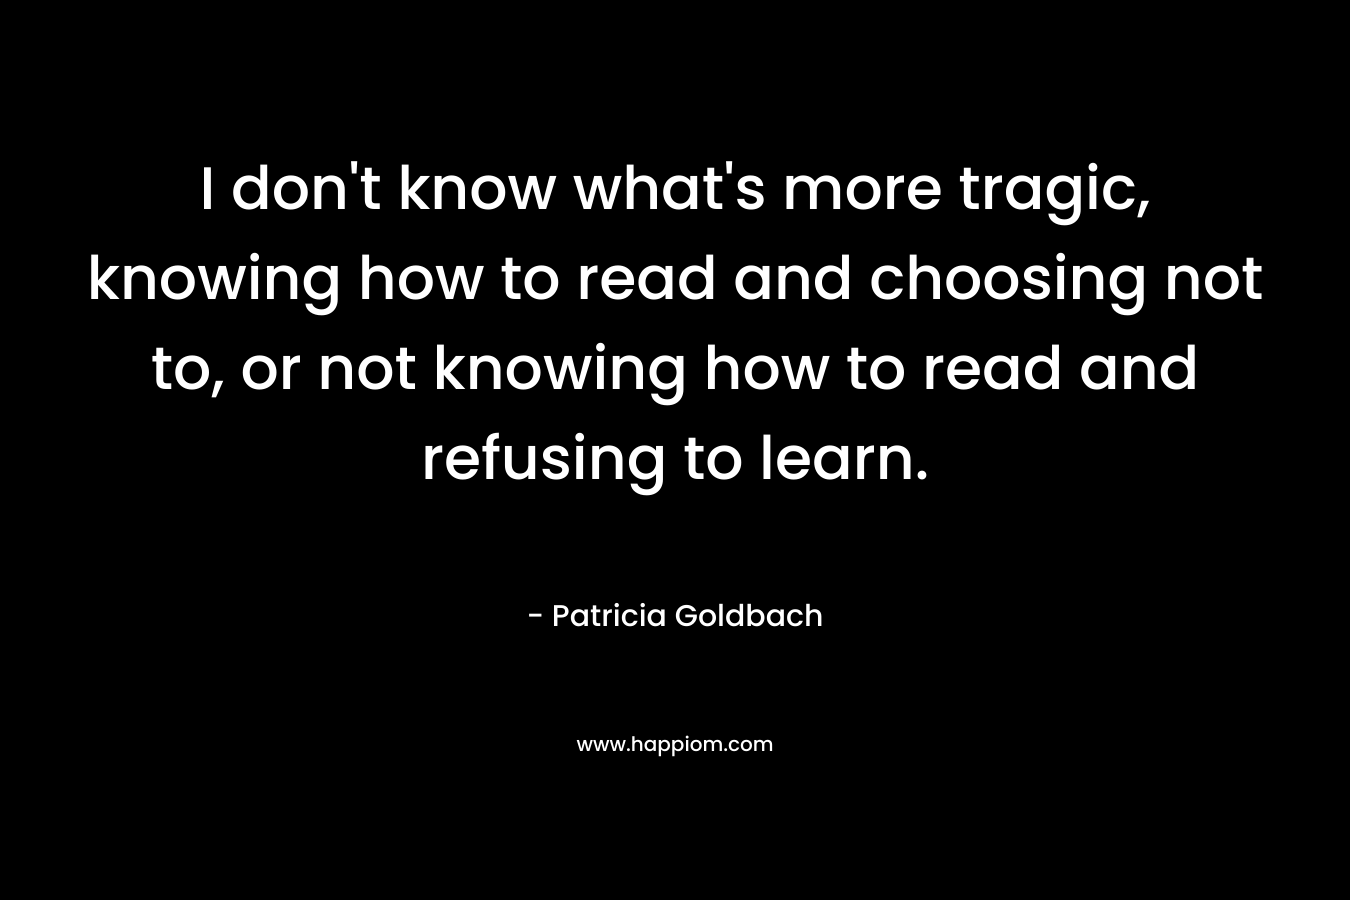 I don't know what's more tragic, knowing how to read and choosing not to, or not knowing how to read and refusing to learn.